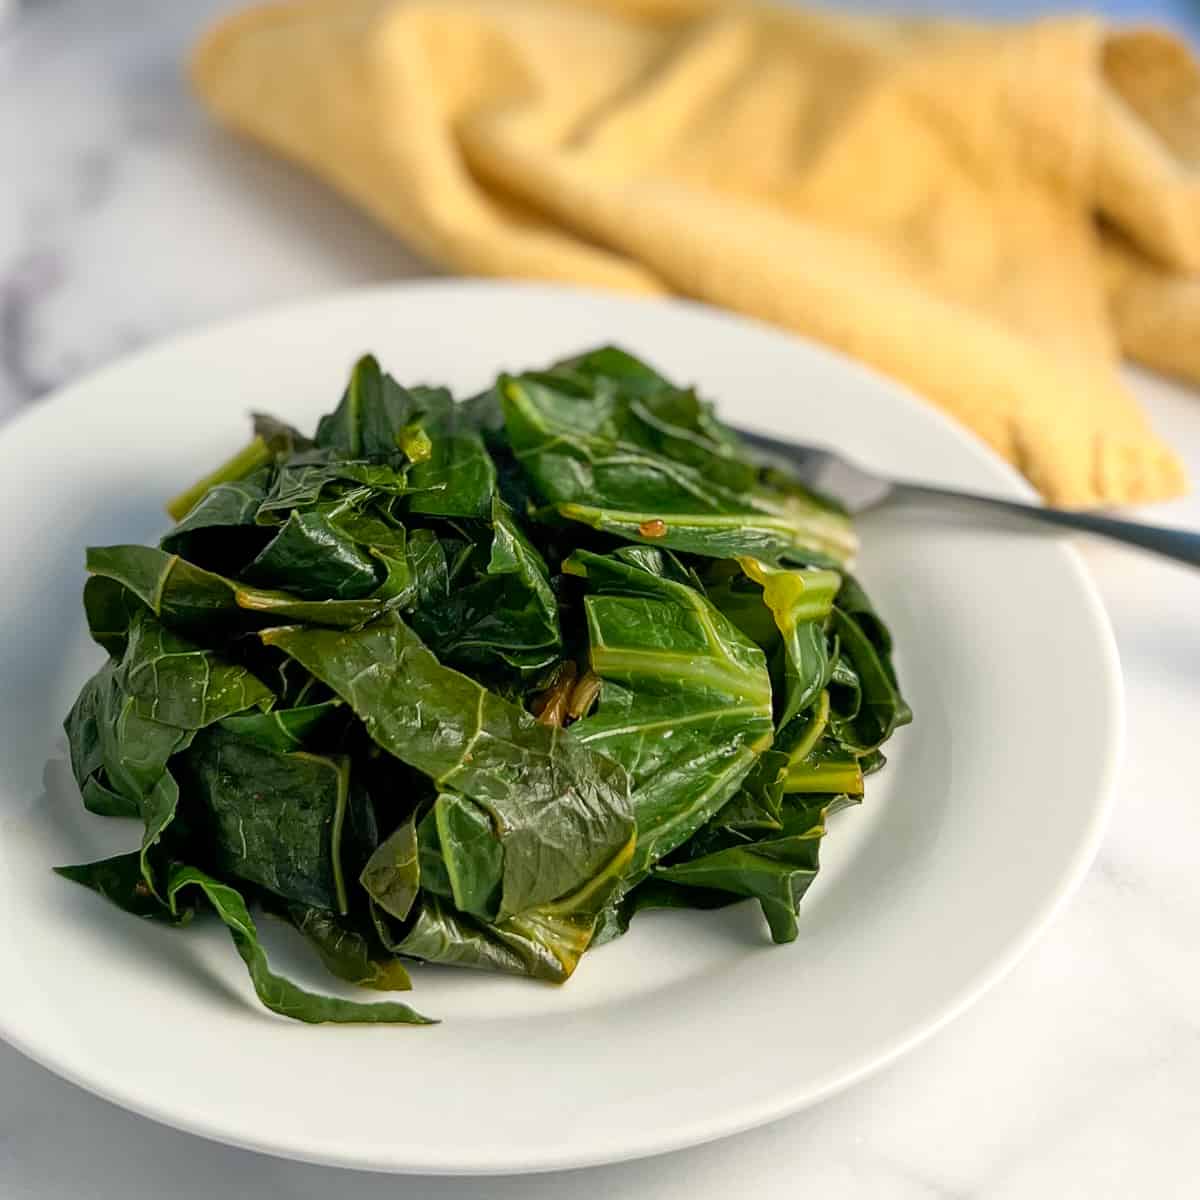 side top view of a plate of cooked vegan collard greens on white plate with fork and yellow napkin blurred in background